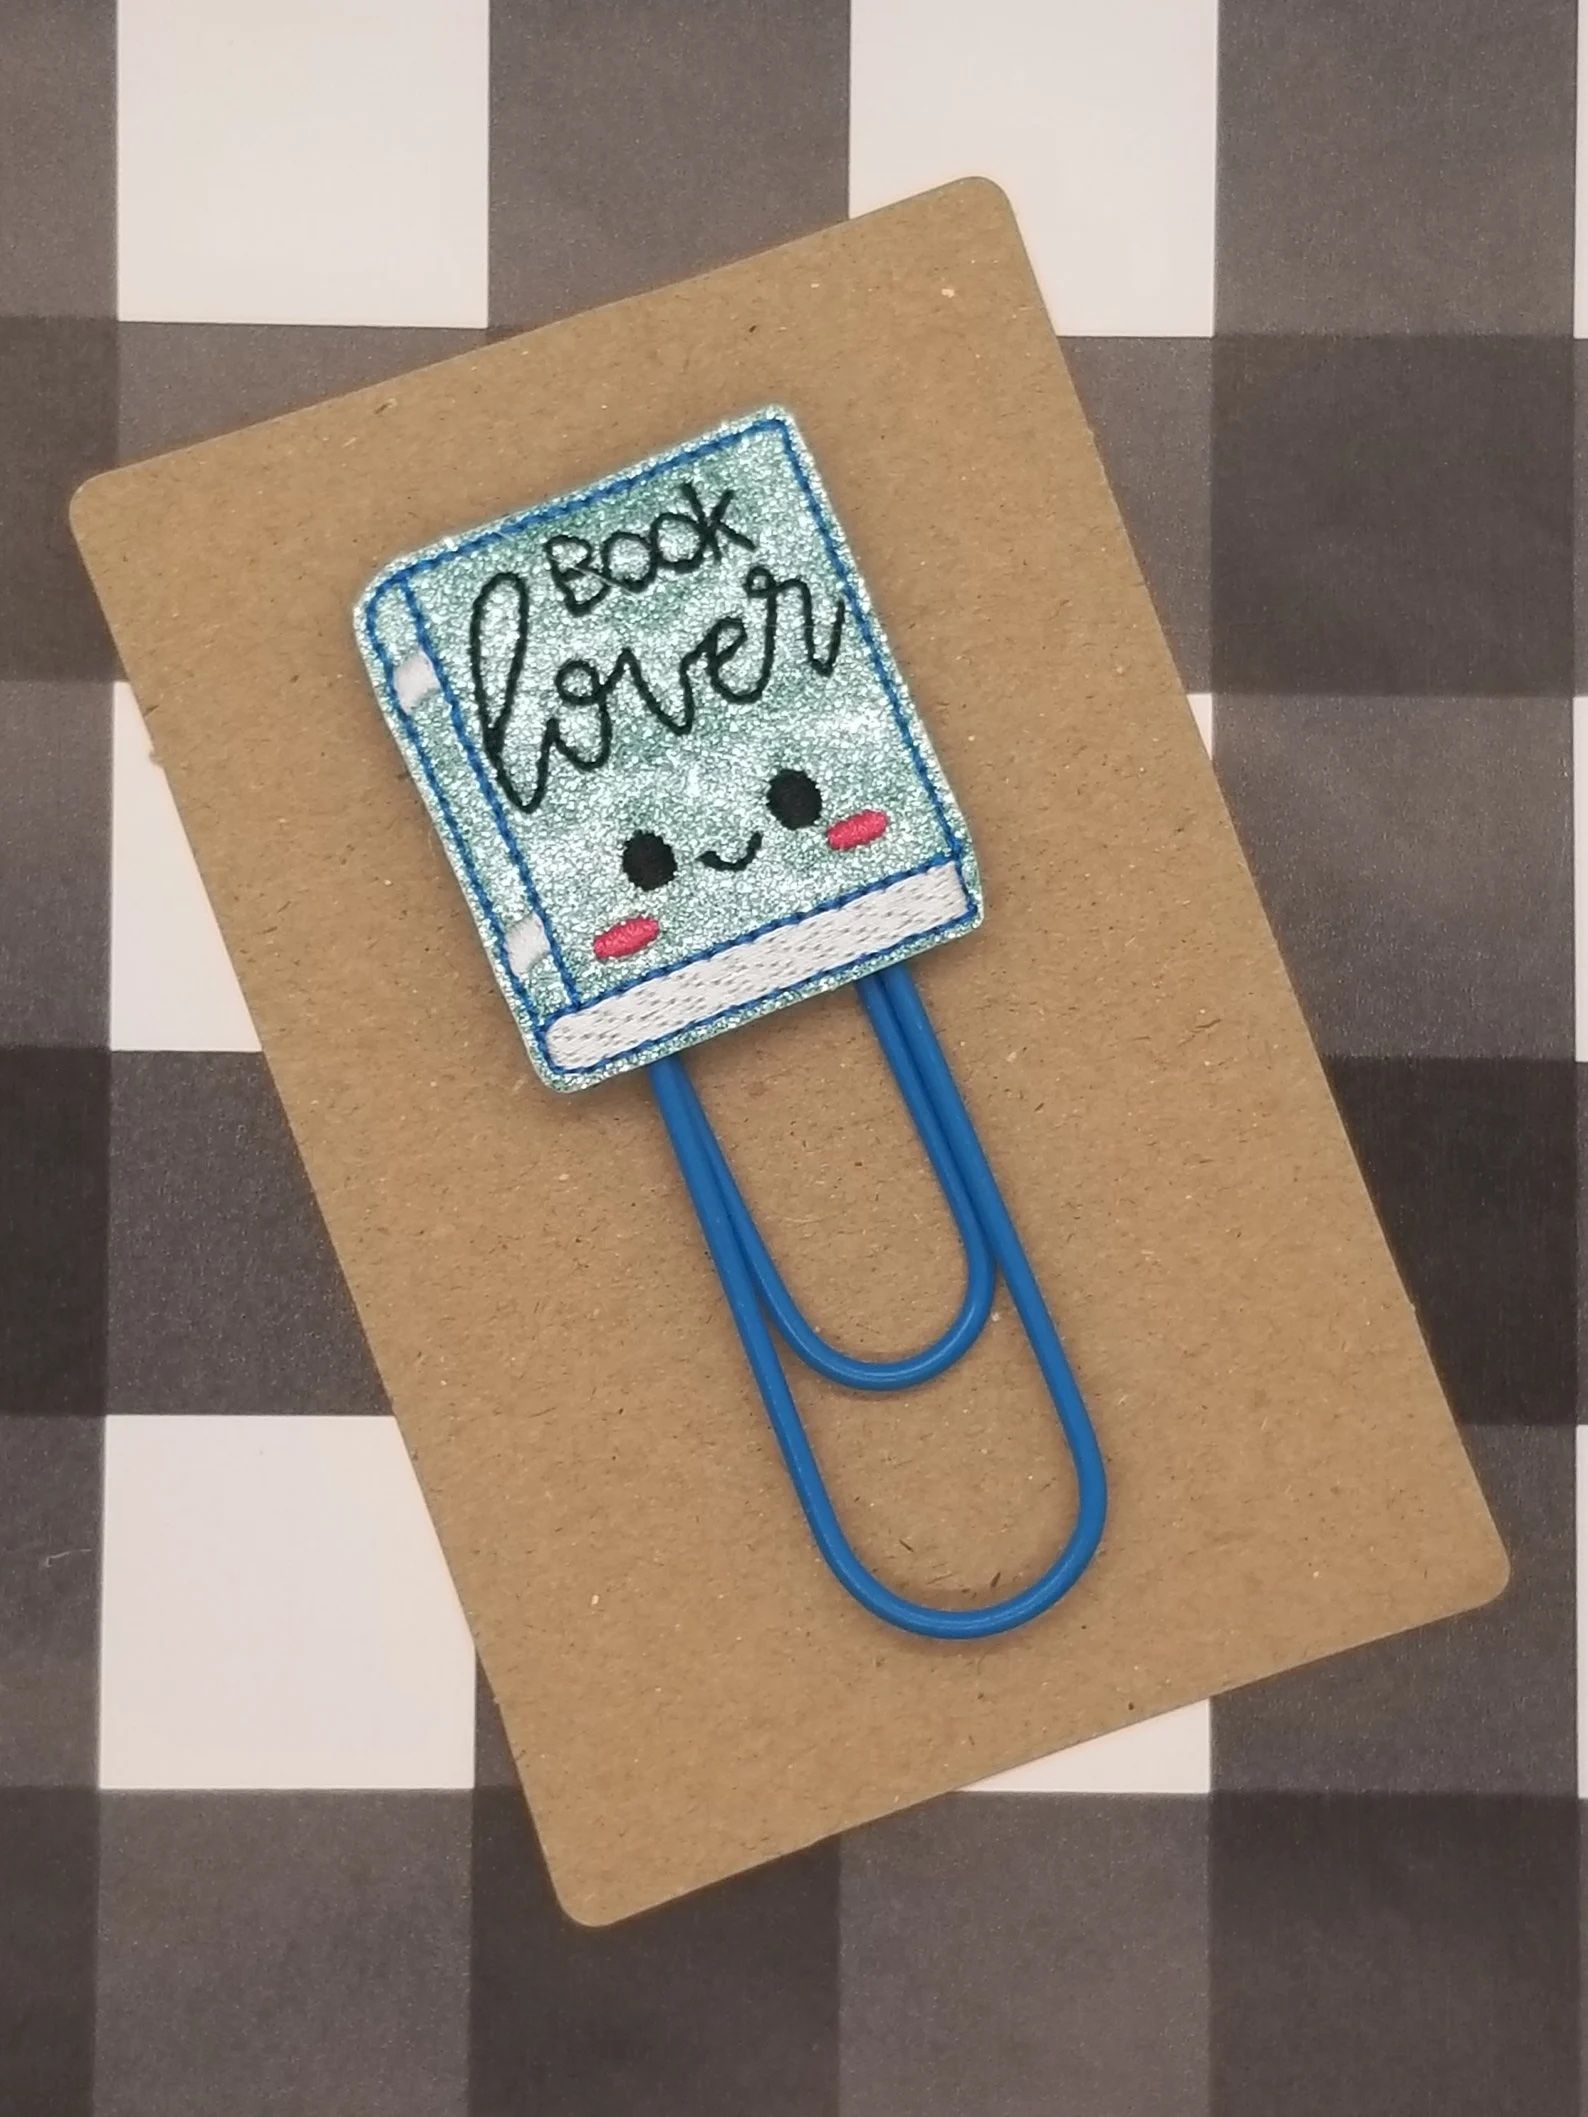 paper clip with a kawaii smiley faced book saying "book lover"